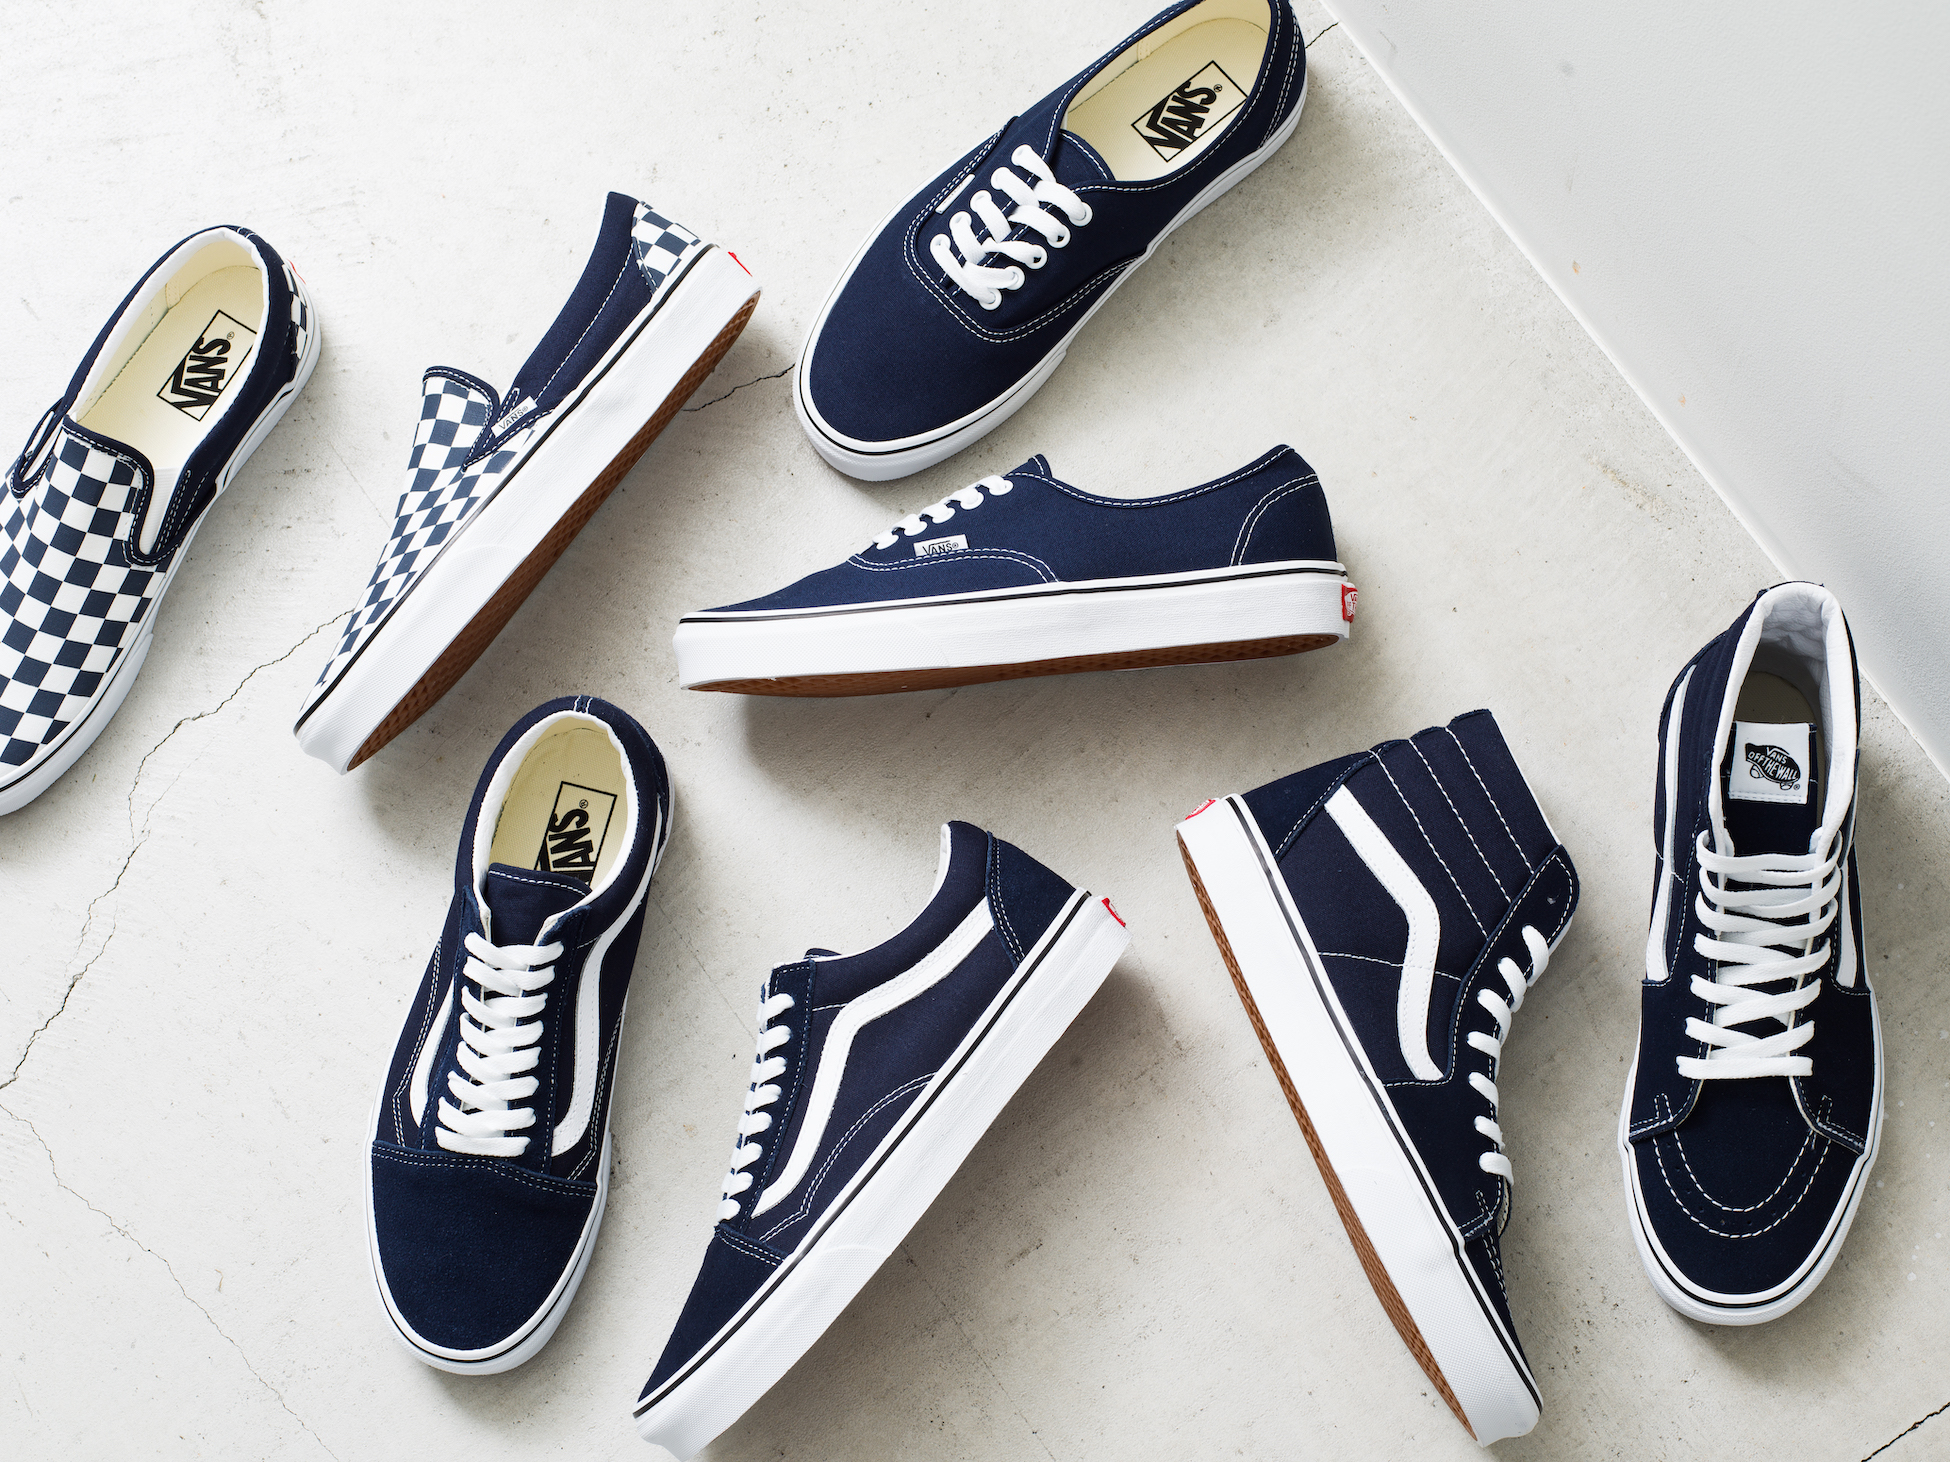 Navy Collection